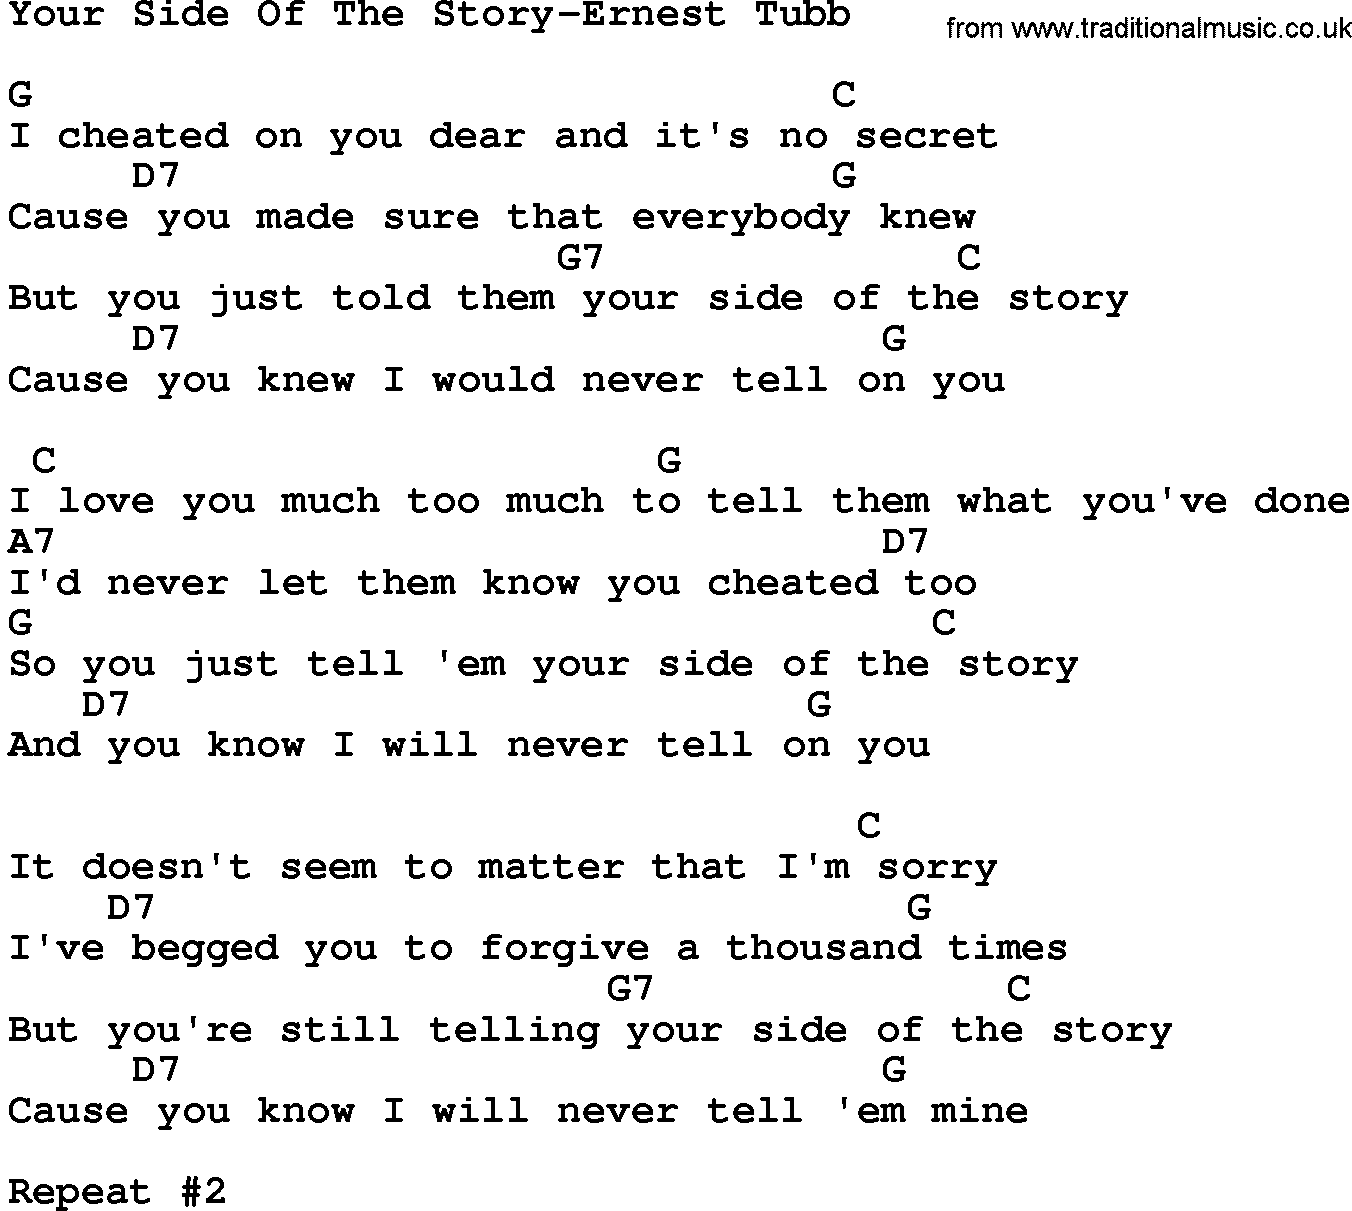 Country music song: Your Side Of The Story-Ernest Tubb lyrics and chords